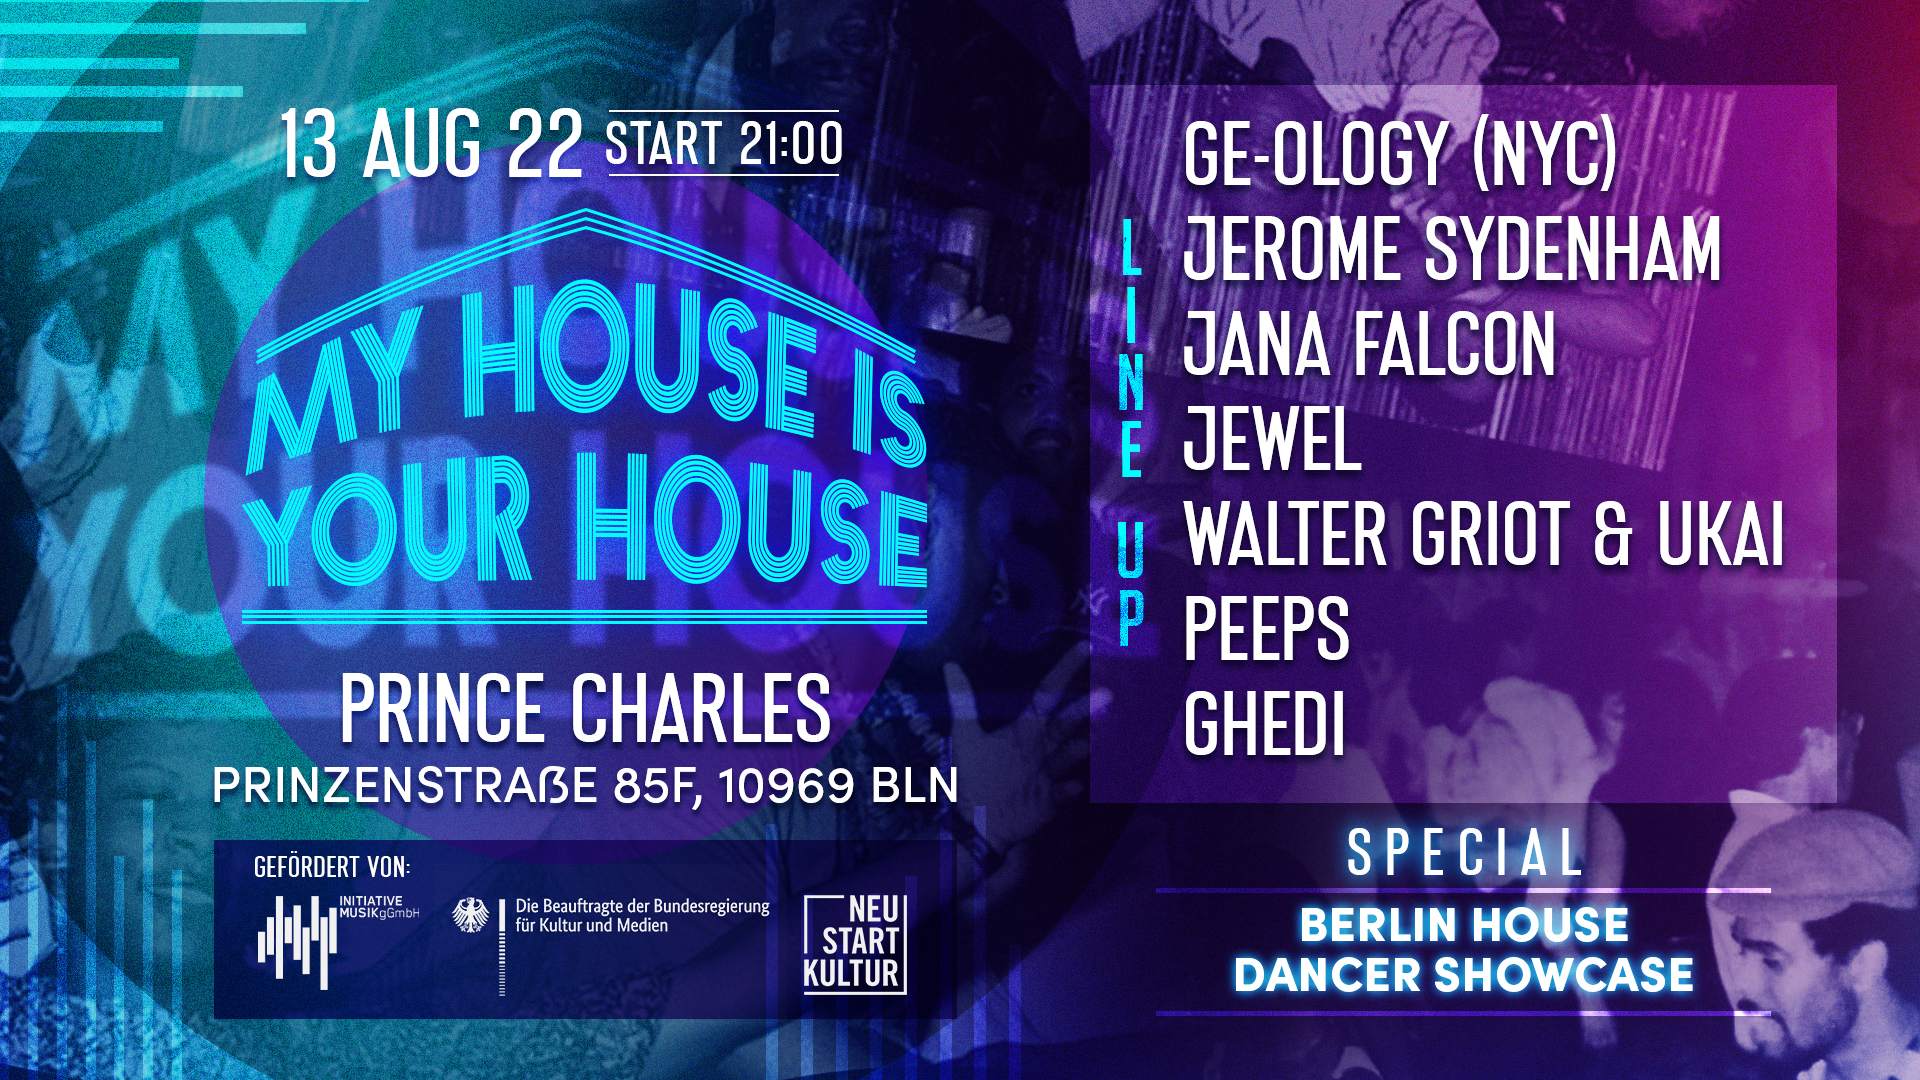 My House Is Your House w/Ge-ology, Jerome Sydenham a.m - フライヤー表